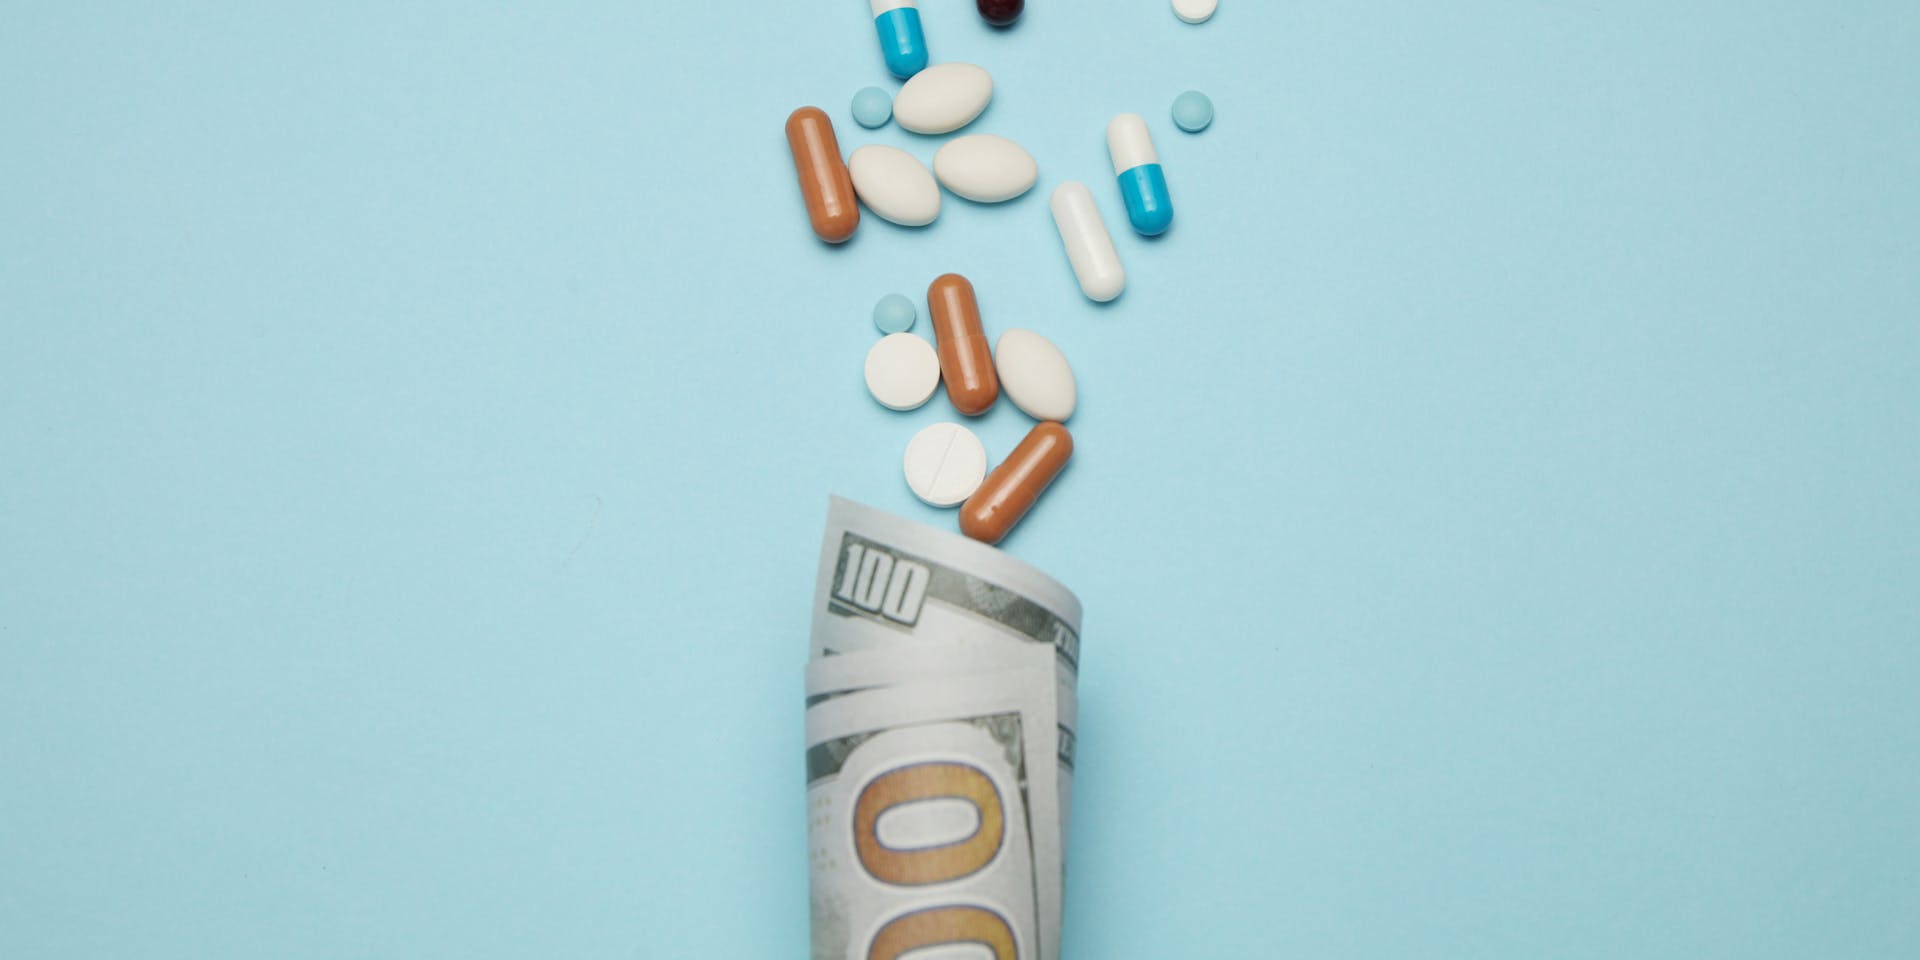 Pharma's expensive gaming of the drug patent system is successfully countered by the Medicines Patent Pool, which increases global access and rewards innovation